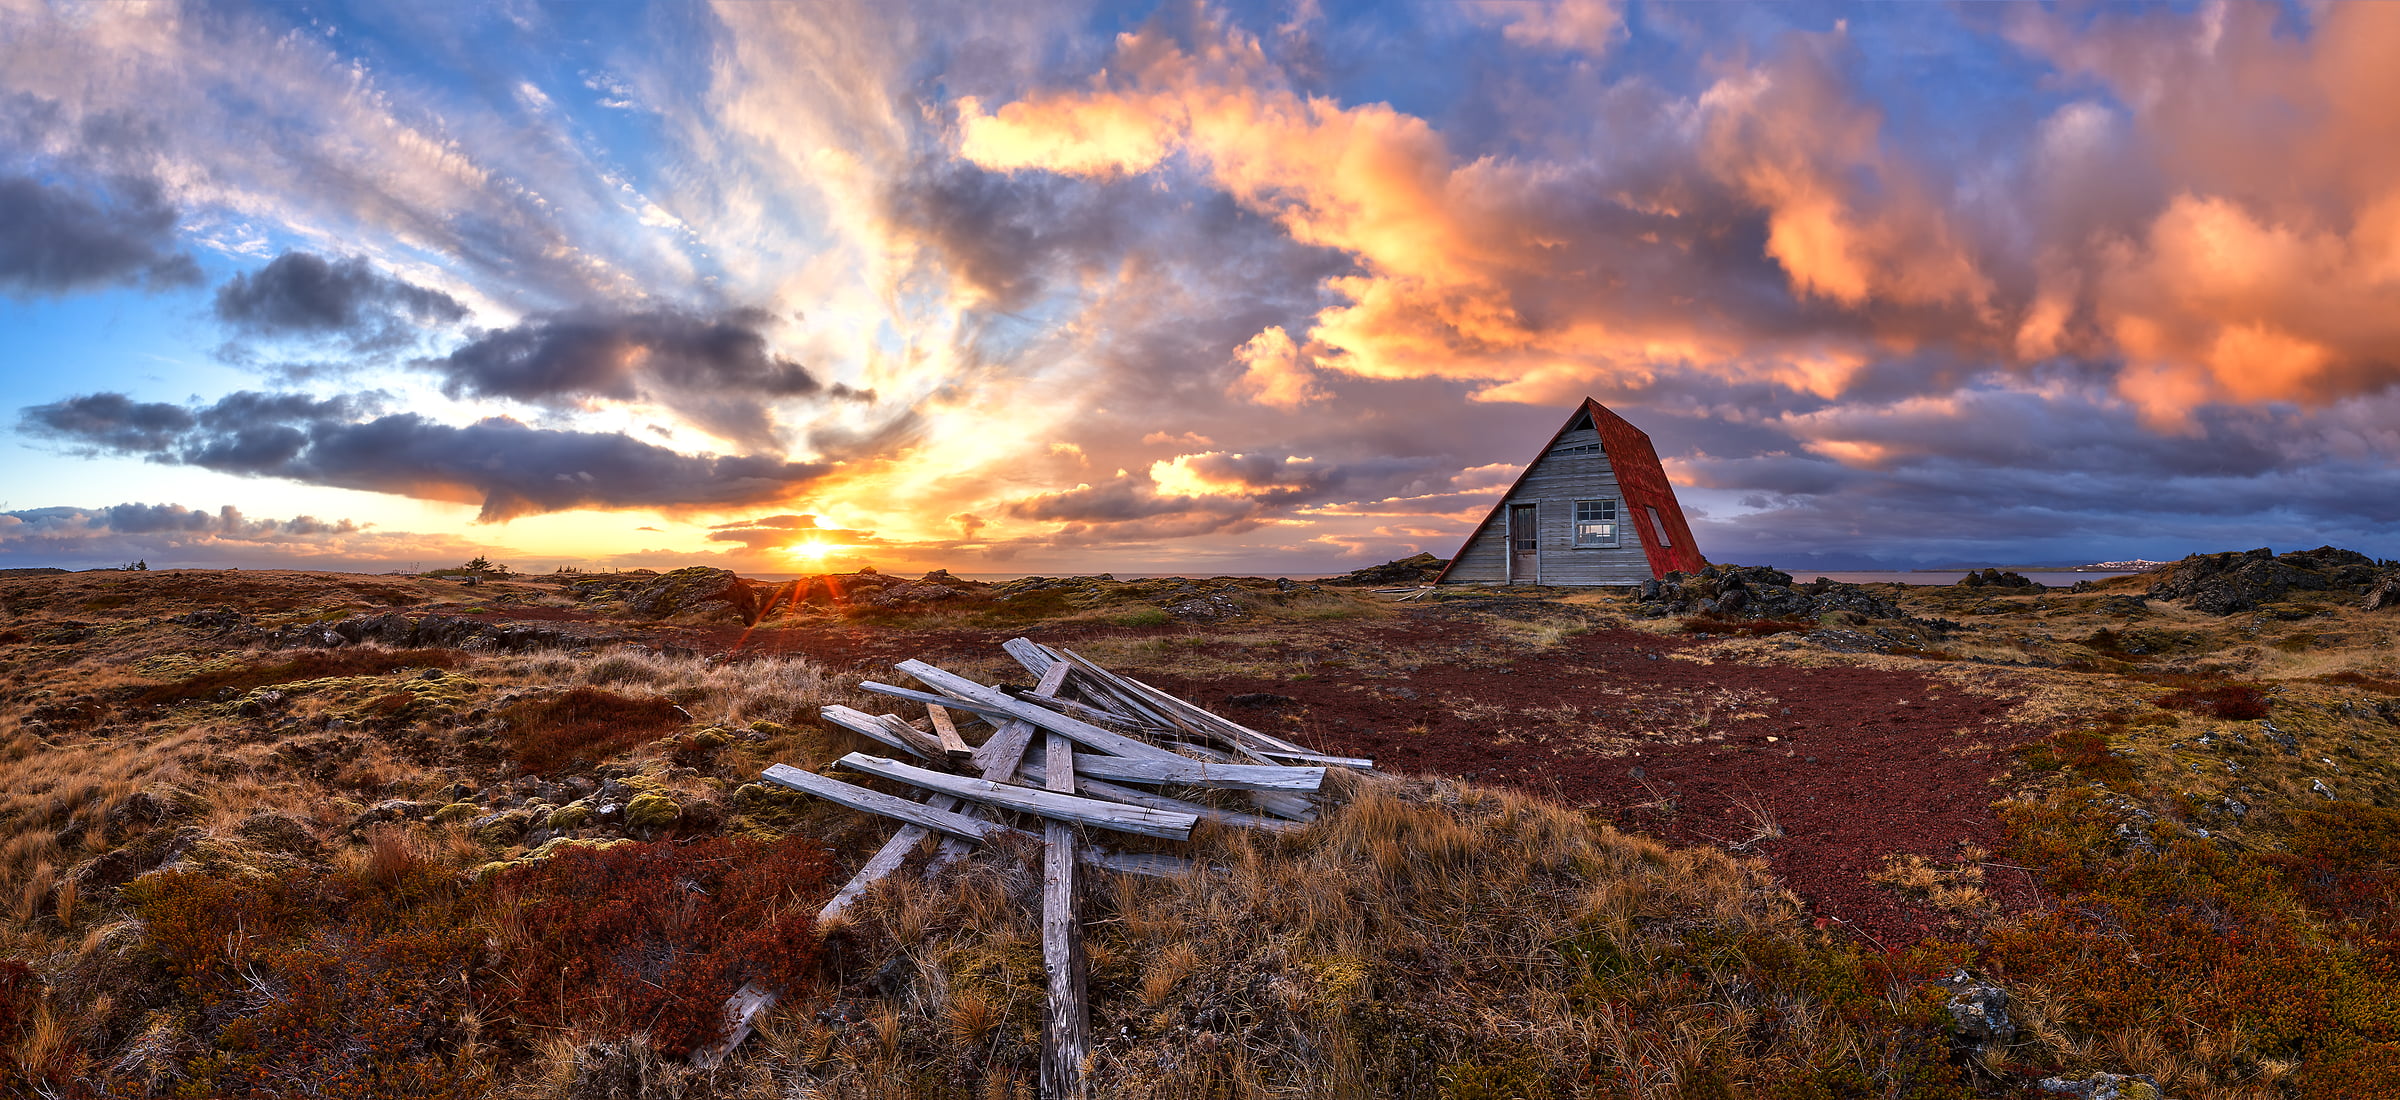 73 megapixels! A very high resolution, large-format VAST photo of an A-frame house in Iceland; fine art landscape photo created at sunset by Scott Dimond on the Great Plains in the Capital Region of Iceland.